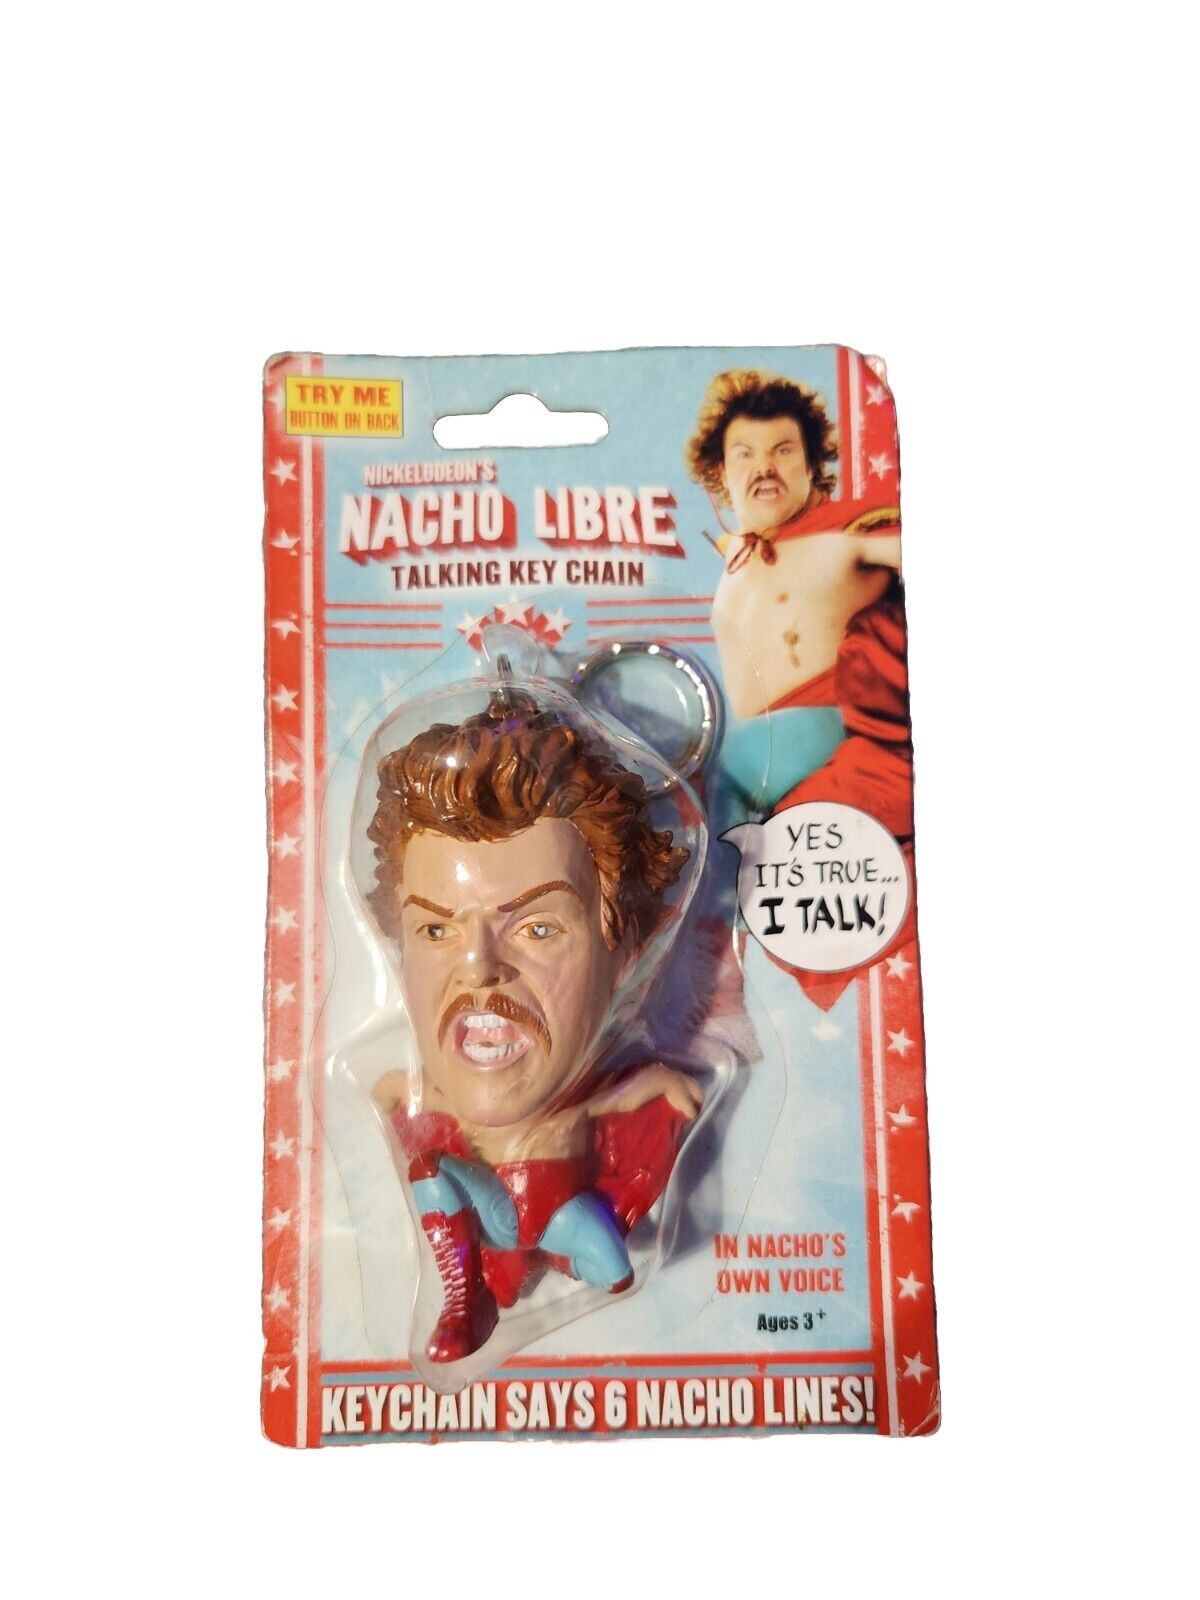 Nickelodeon Nacho Libre Talking Key Chain New In Package